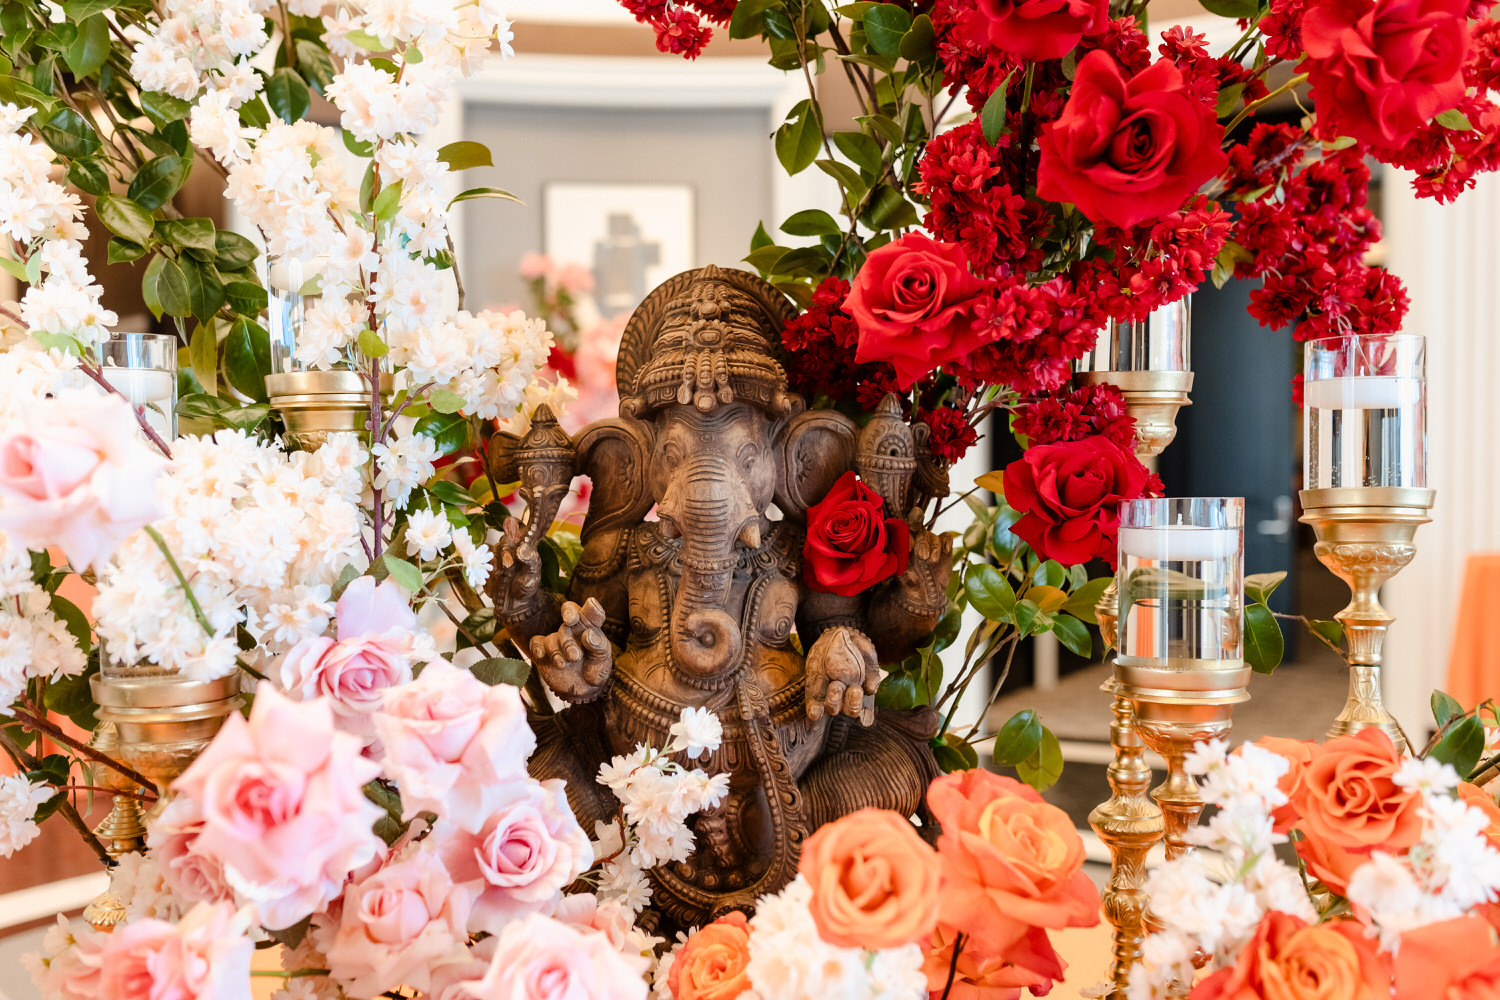 A table filled with flowers and a statue of ganesha.